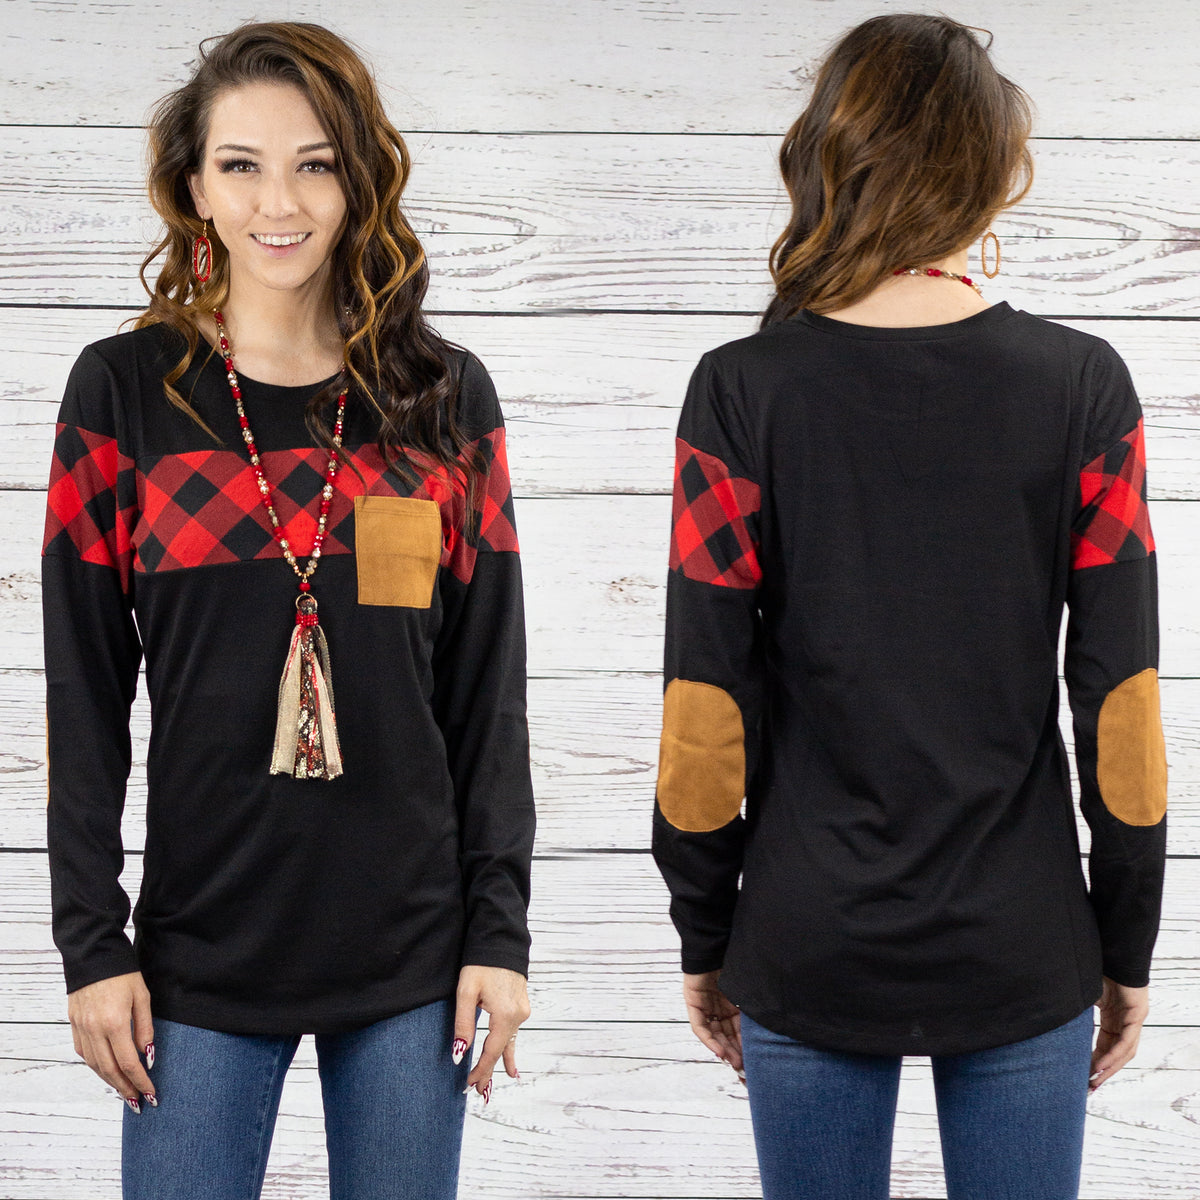 10447 - Plaid Long Sleeve Top with Suede Elbow Patches - Red Plaid